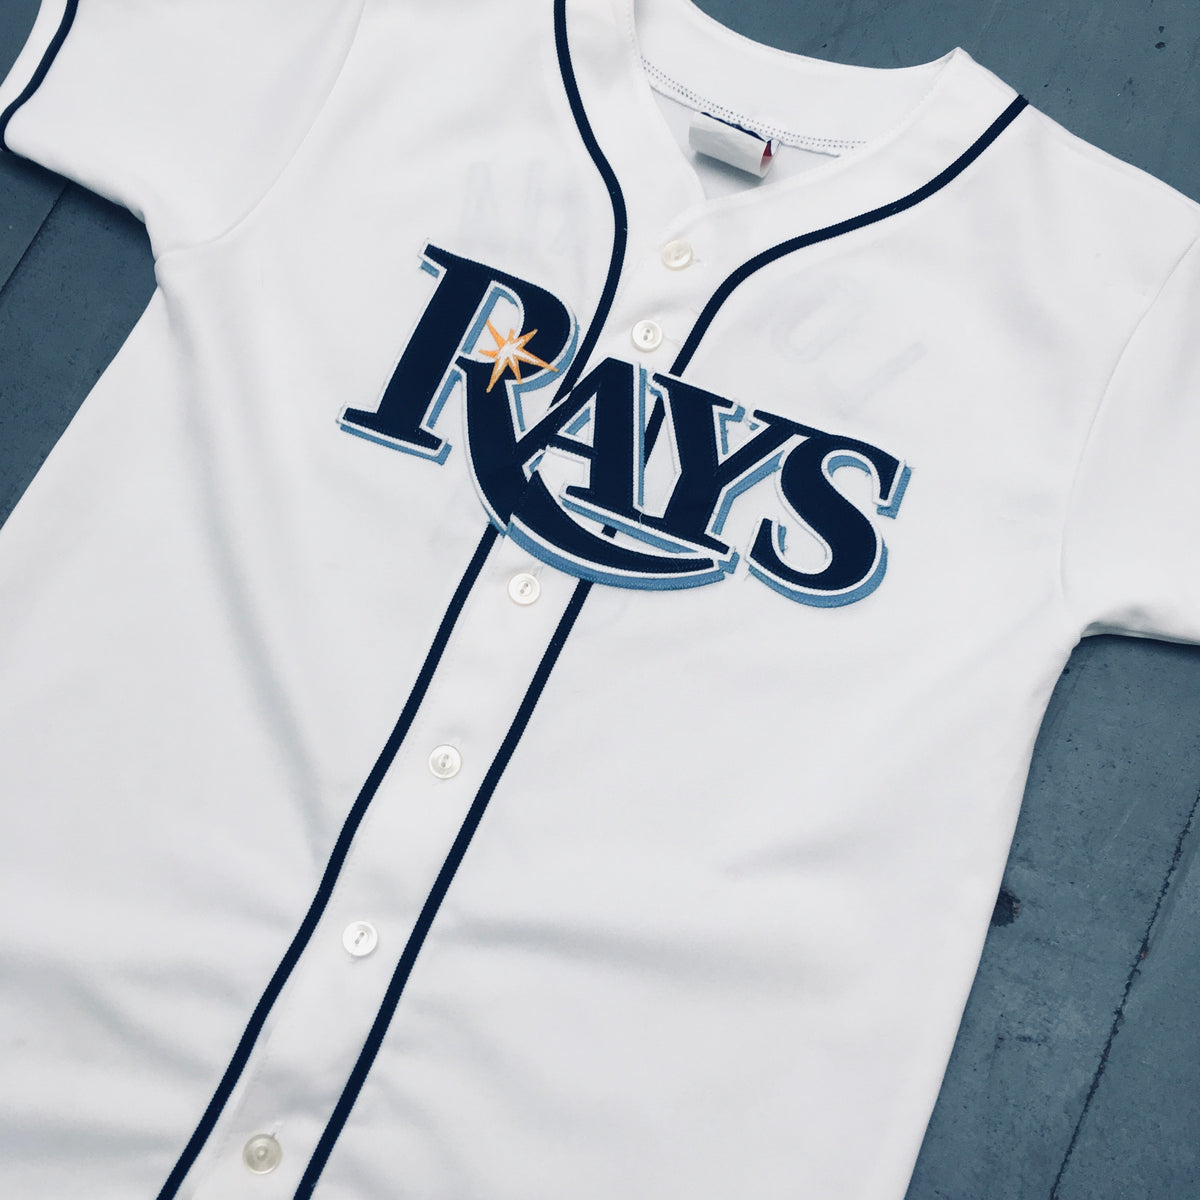 tampa rays jersey